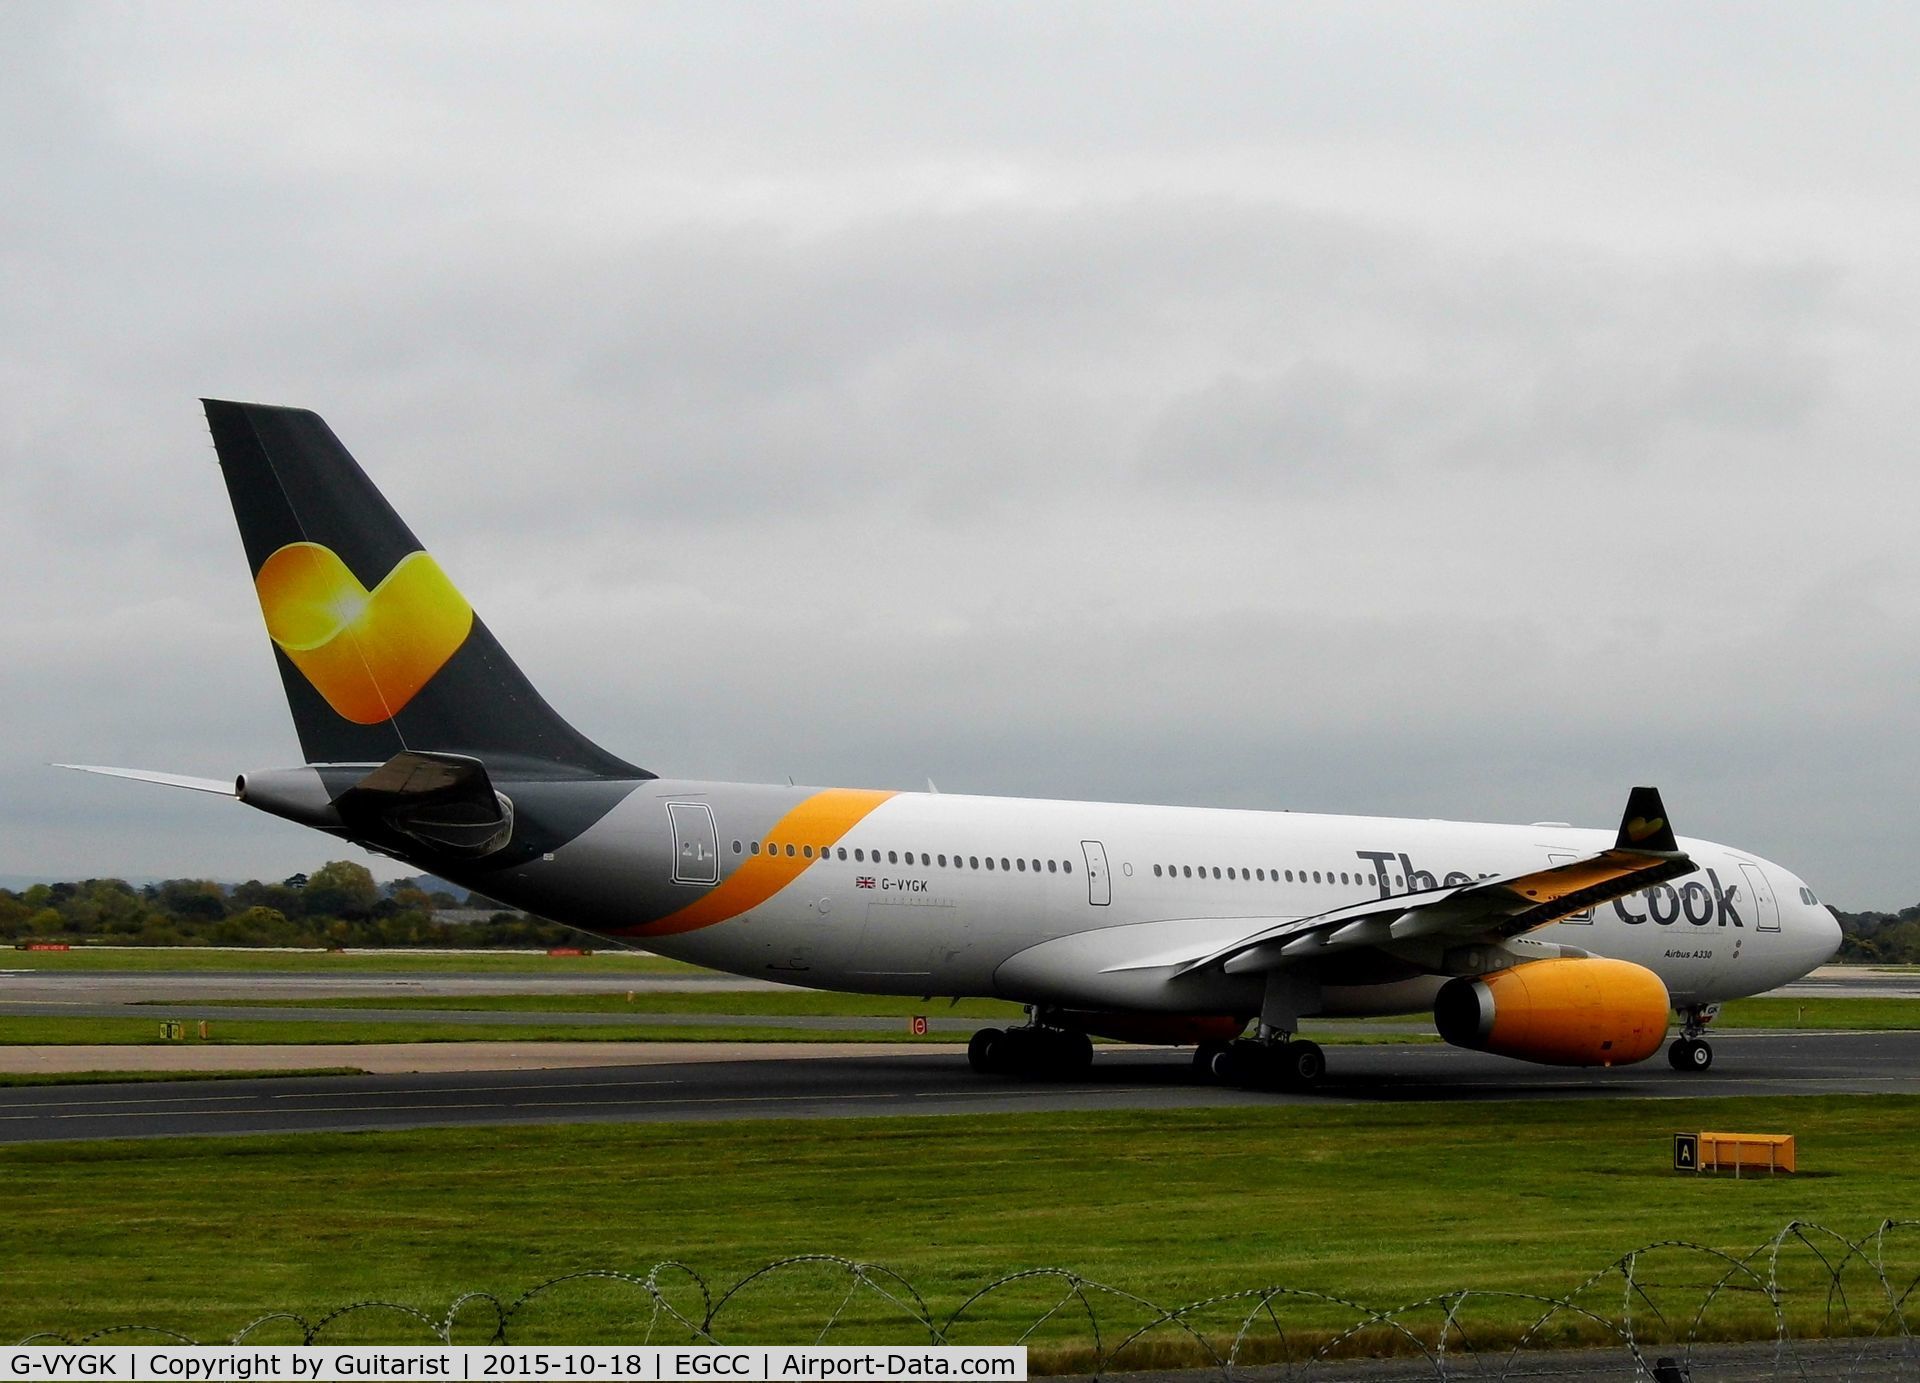 G-VYGK, 2014 Airbus A330-243 C/N 1498, At Manchester